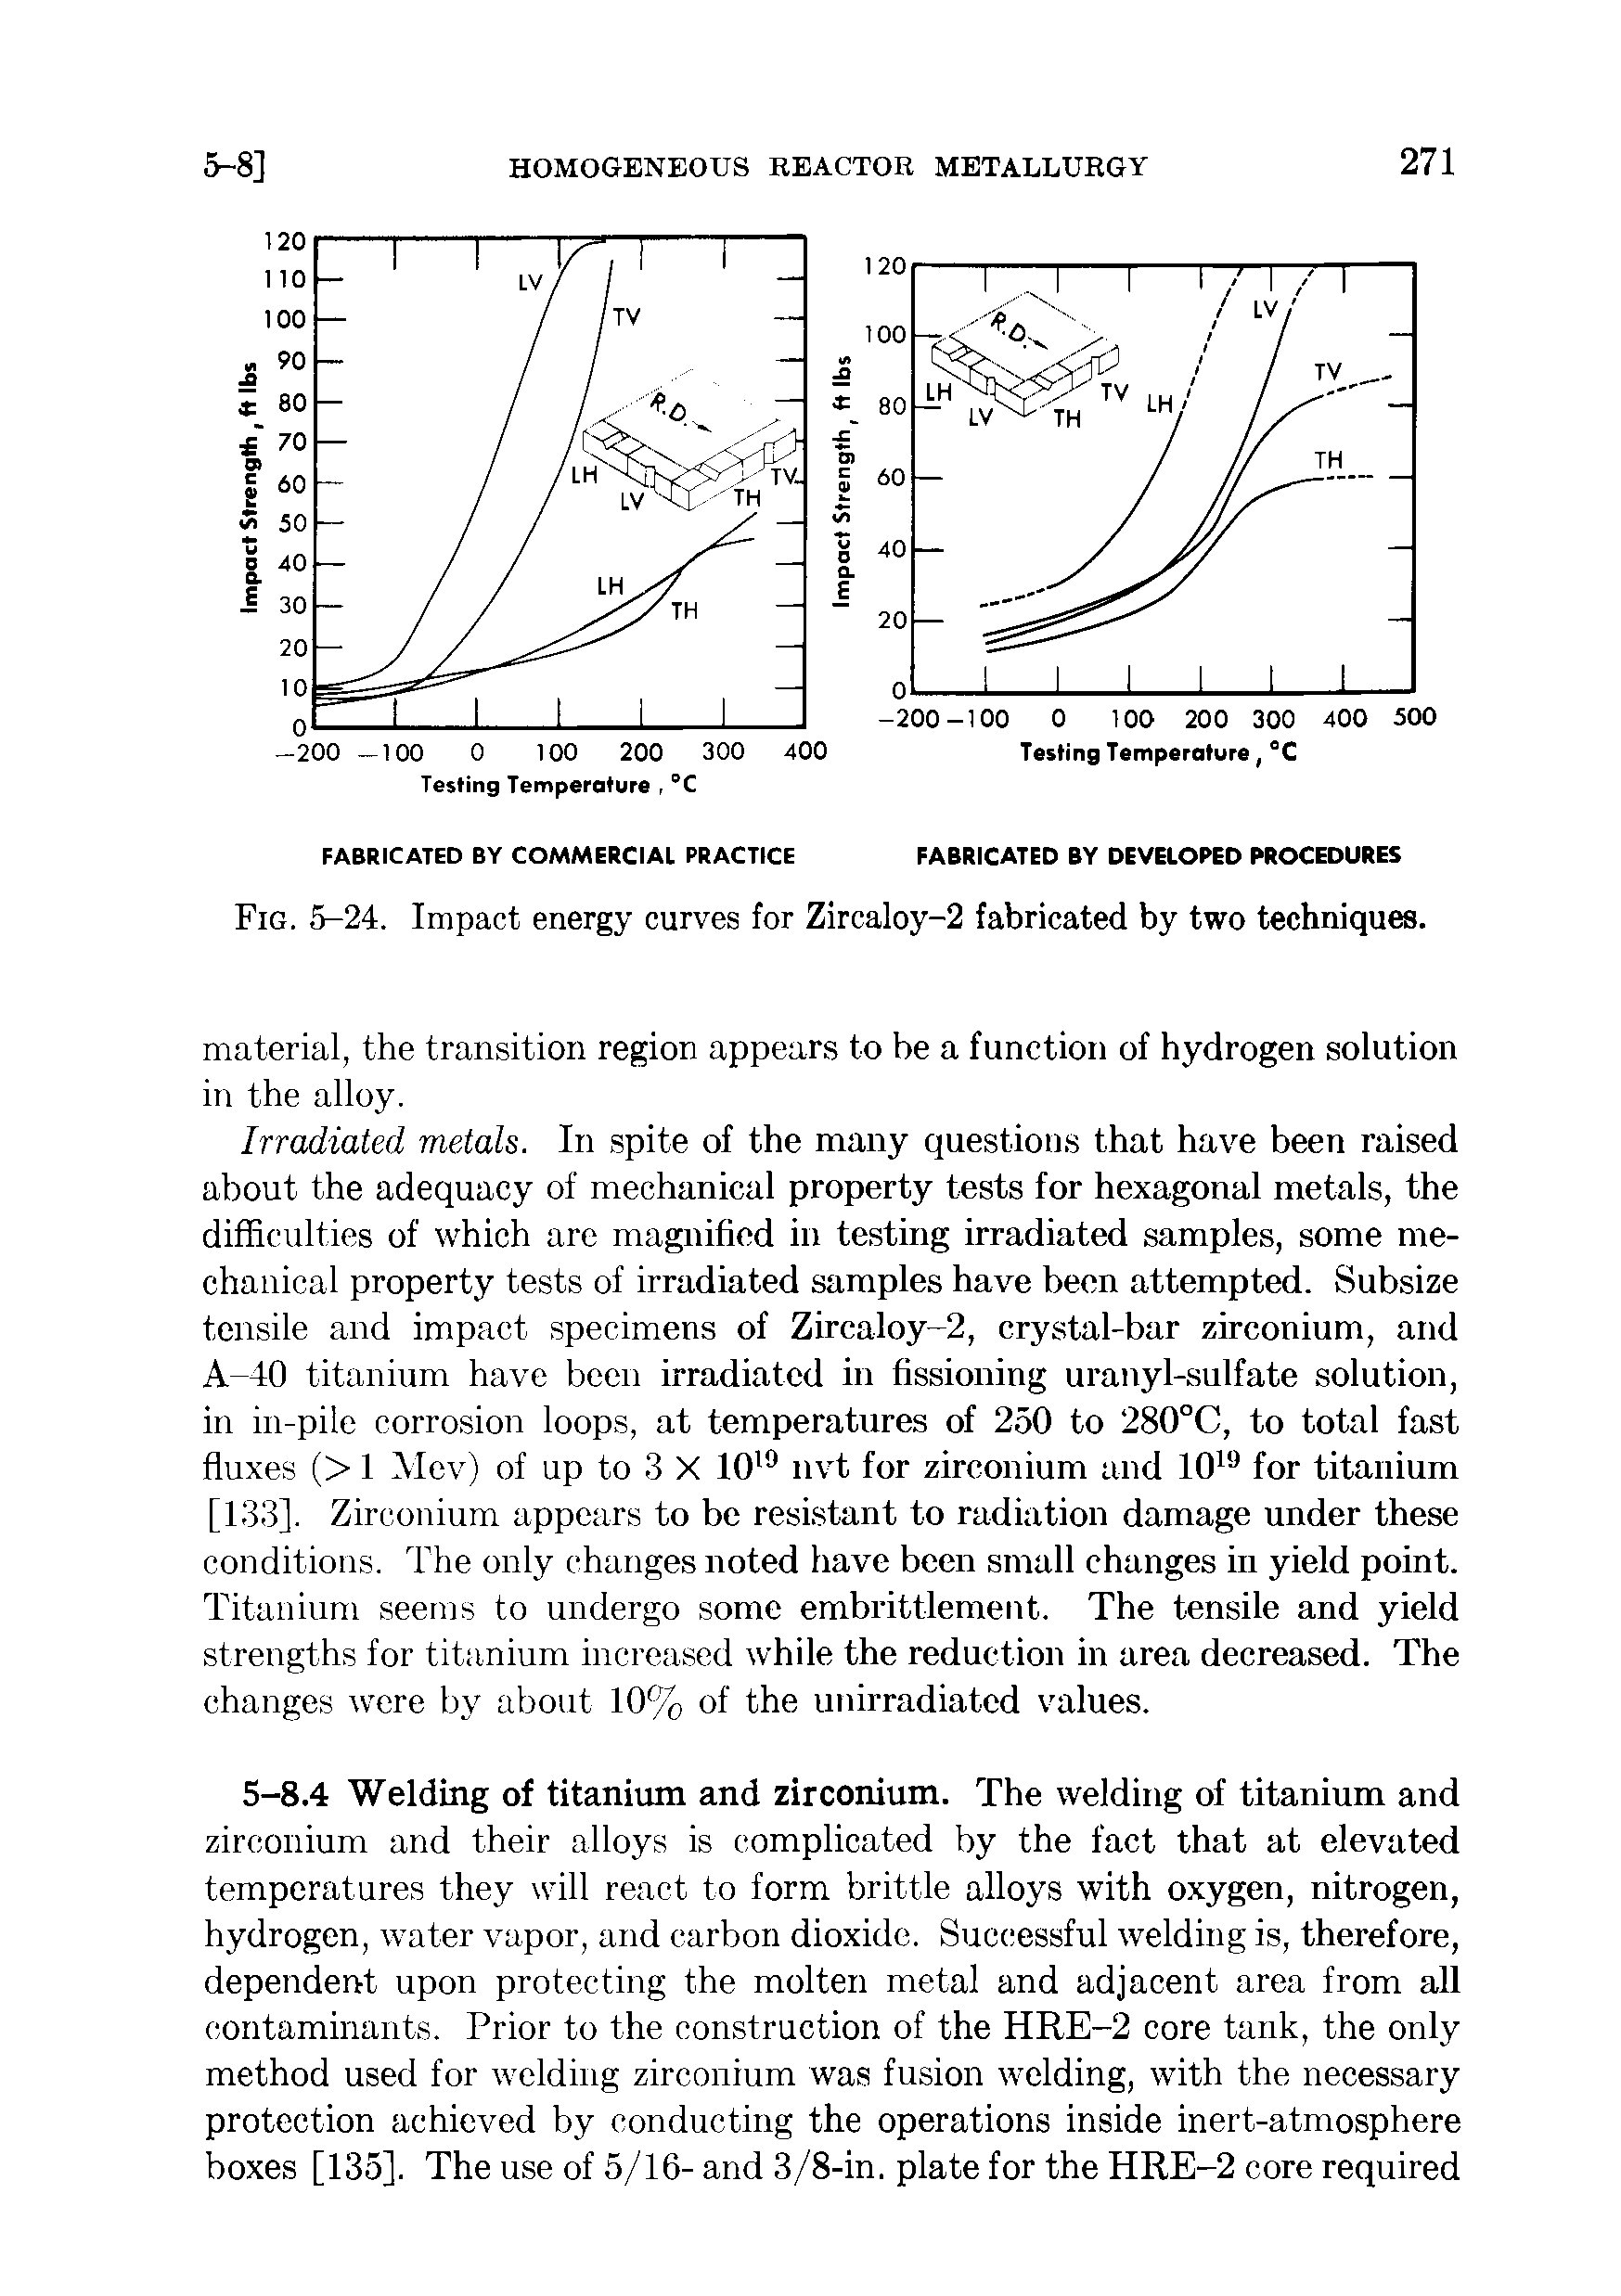 Fig. 5-24. Impact energy curves for Zircaloy-2 fabricated by two techniques.